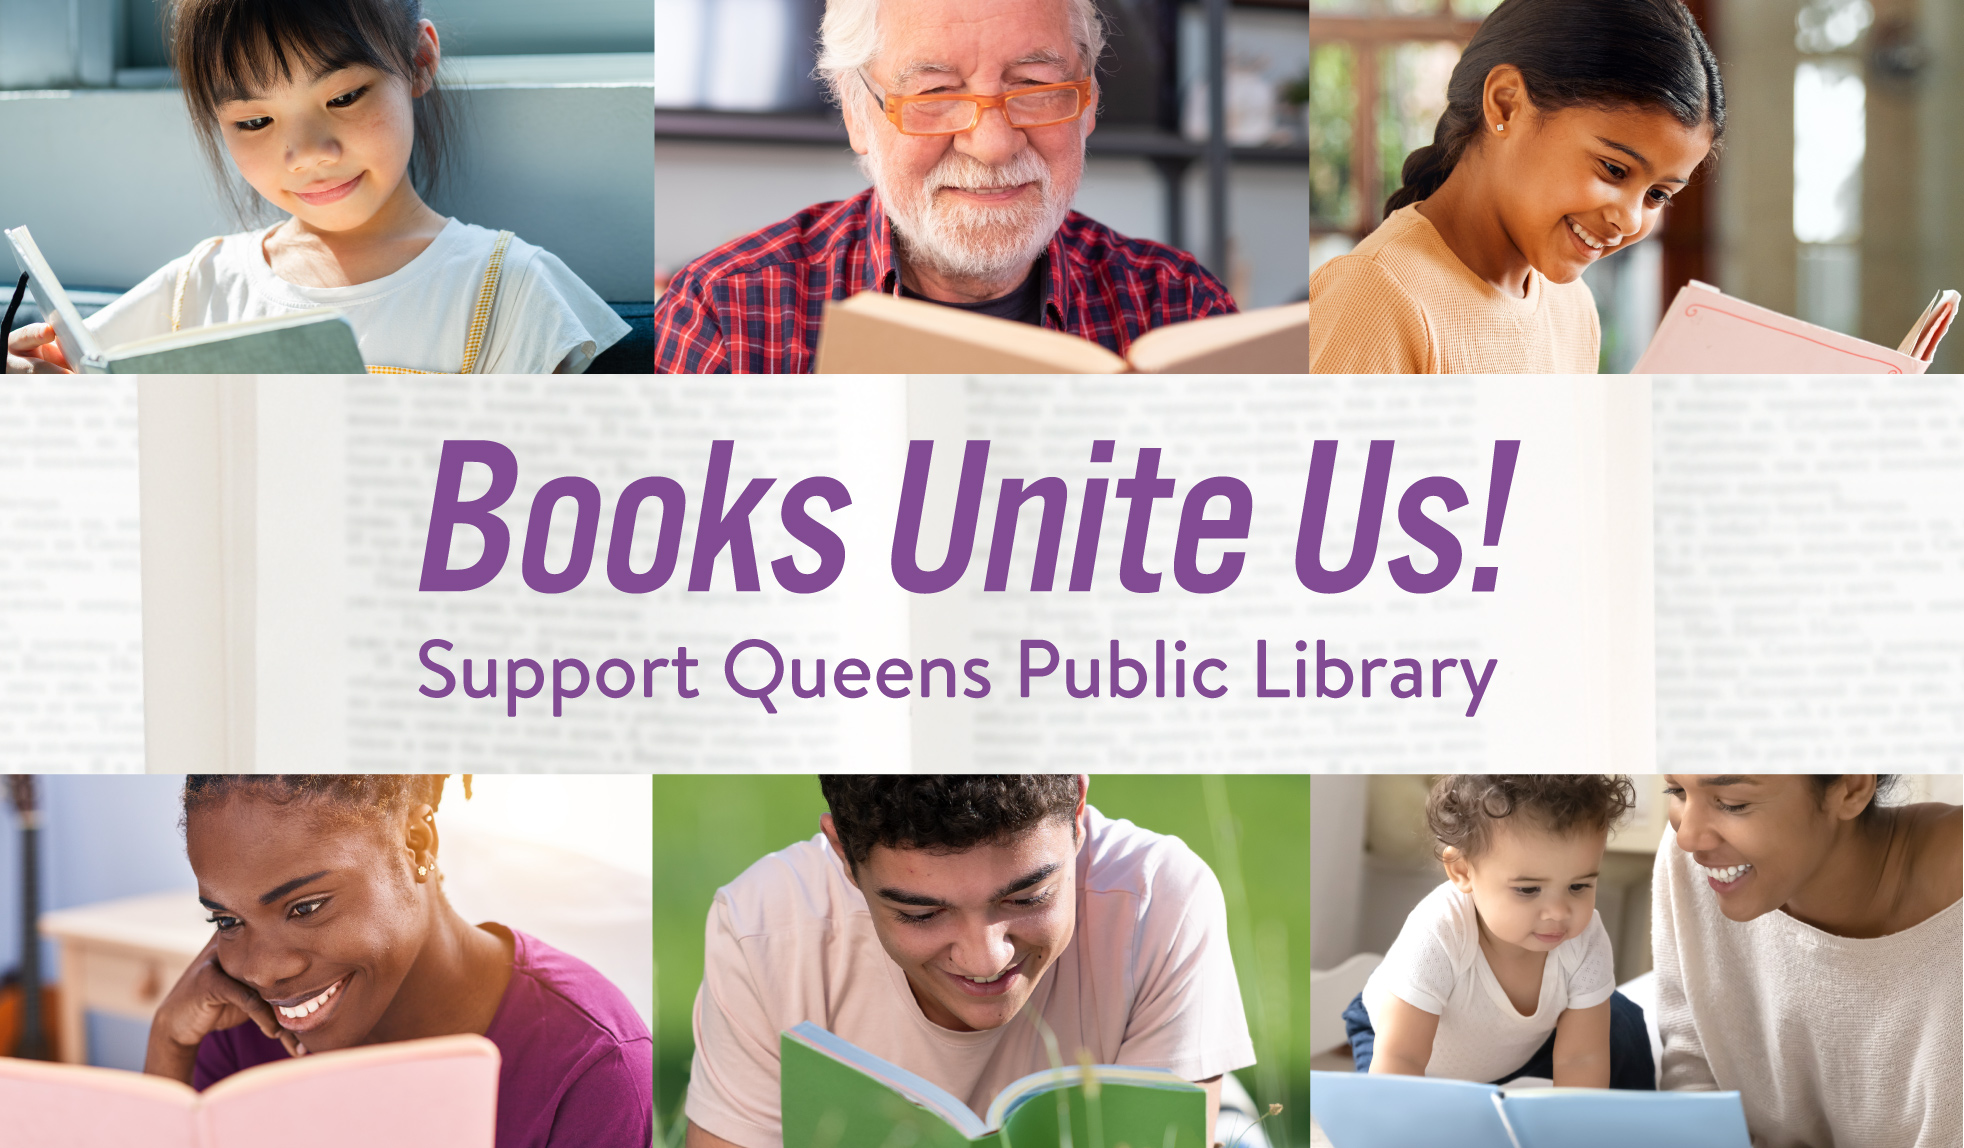 Strengthen our collections, services and programs so everyone can feel welcome and seen at Queens Public Library!